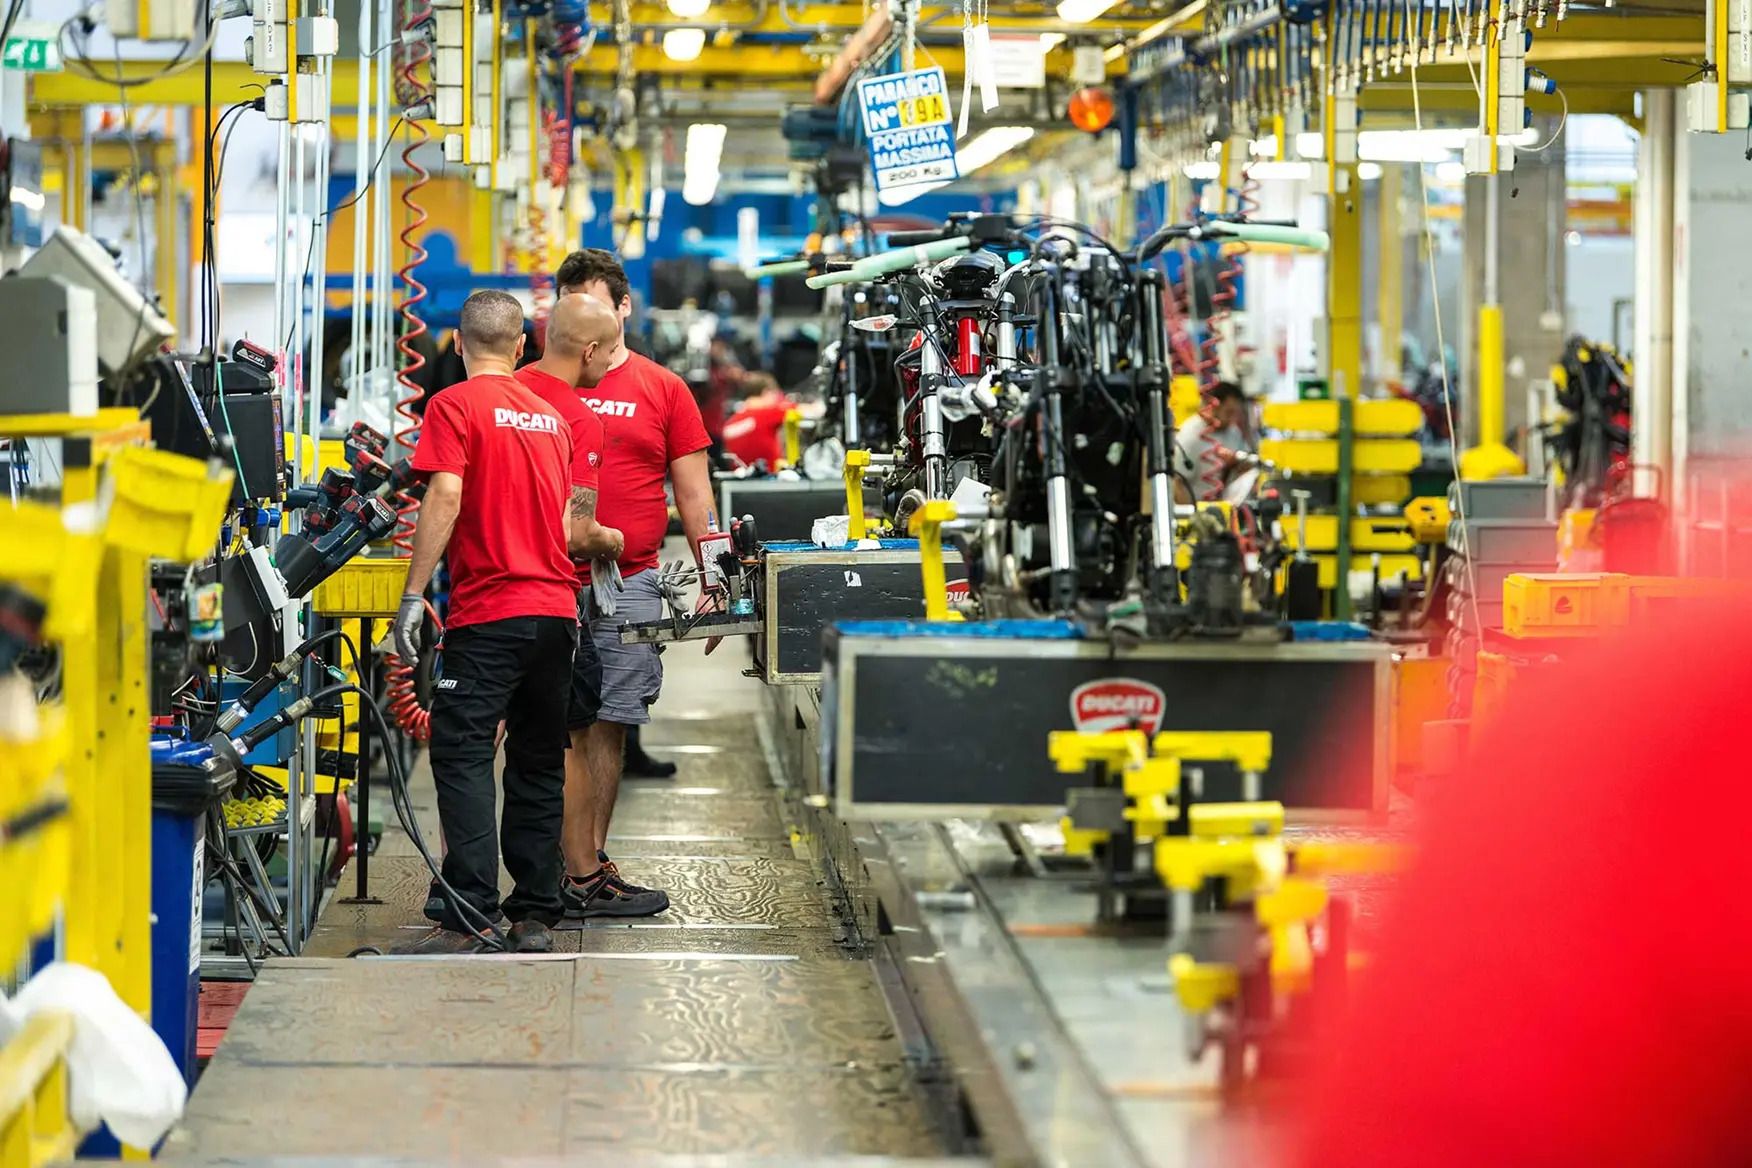 Assembly line at the Ducati factory